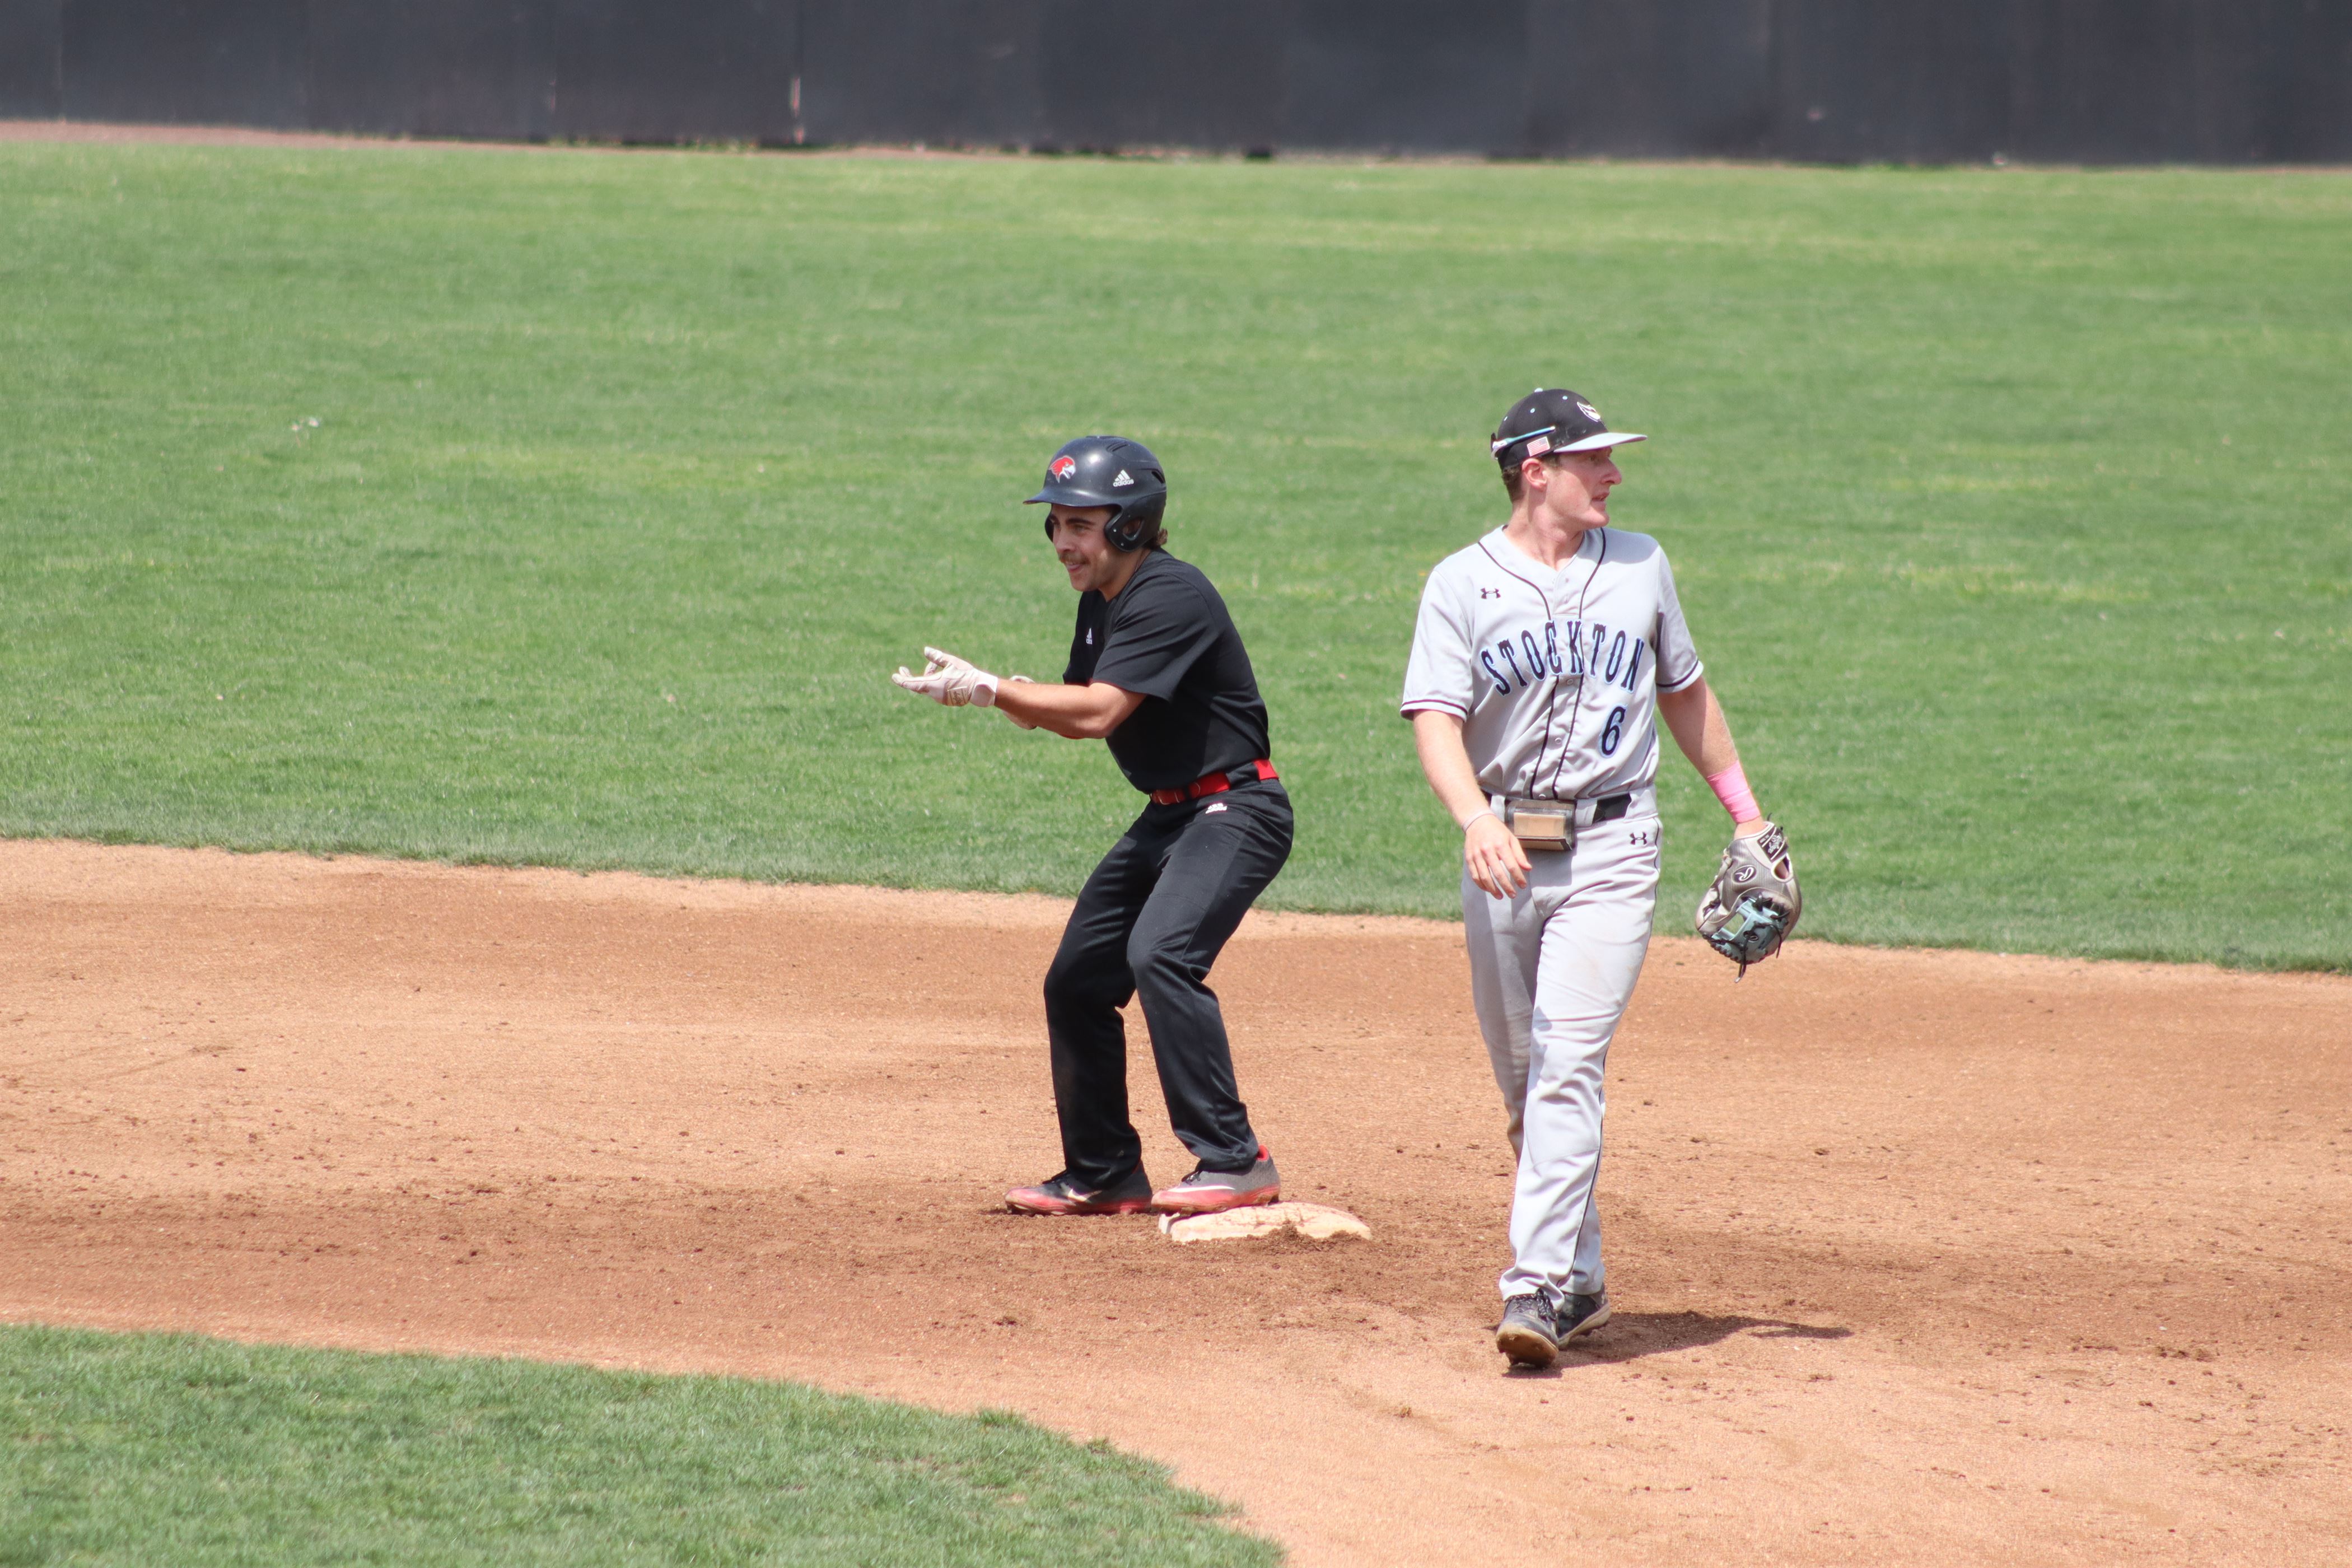 A celebration ensues on second base after a double is hit by the Red Hawks. Trevor Giesberg | The Montclarion